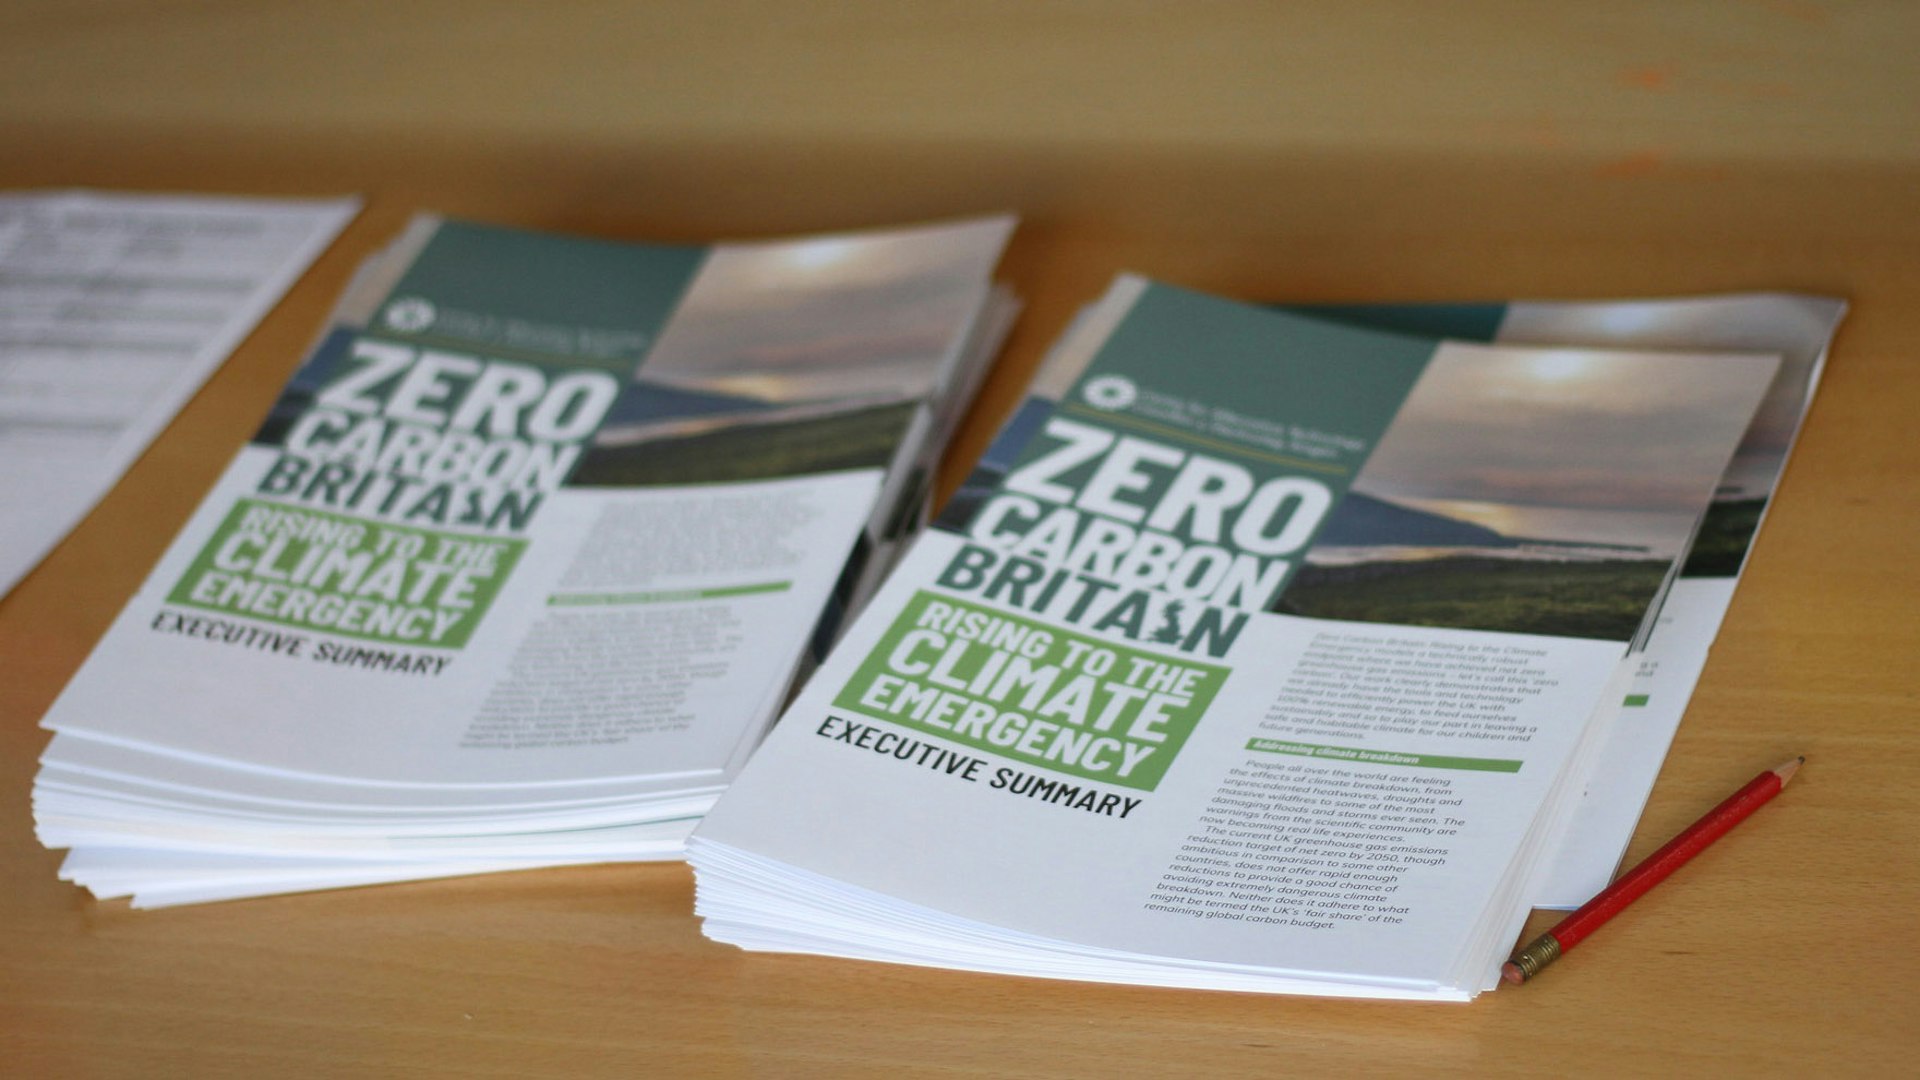 Zero Carbon Britain: Rising to the Climate Emergency Summary reports piled on a table